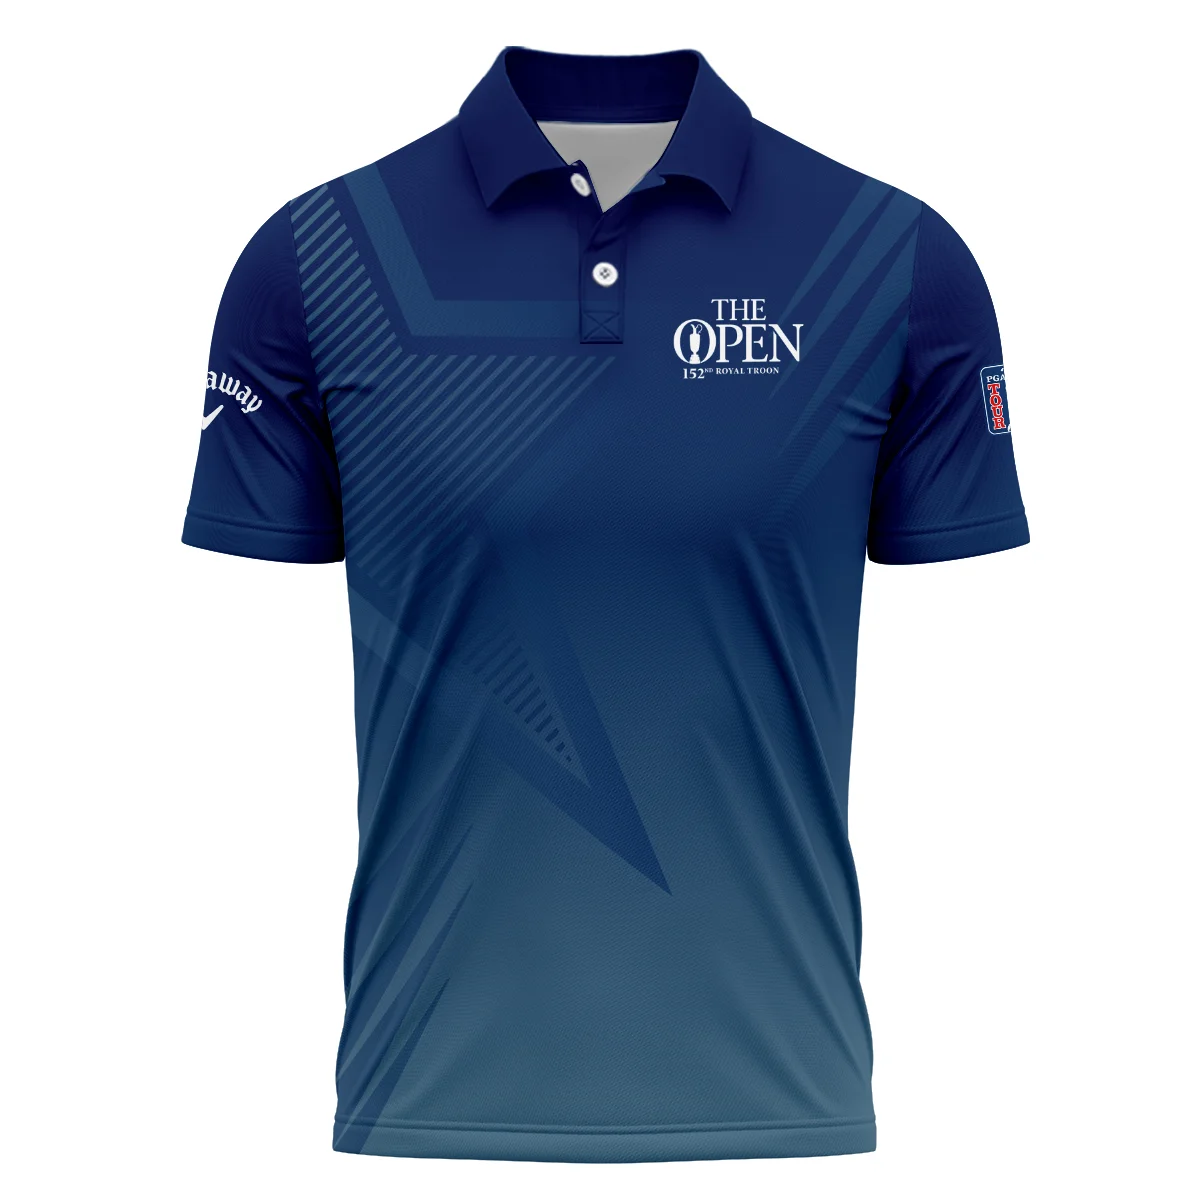 Callaway 152nd Open Championship Abstract Background Dark Blue Gradient Star Line Sleeveless Jacket All Over Prints HOTOP260624A04CLWSJK